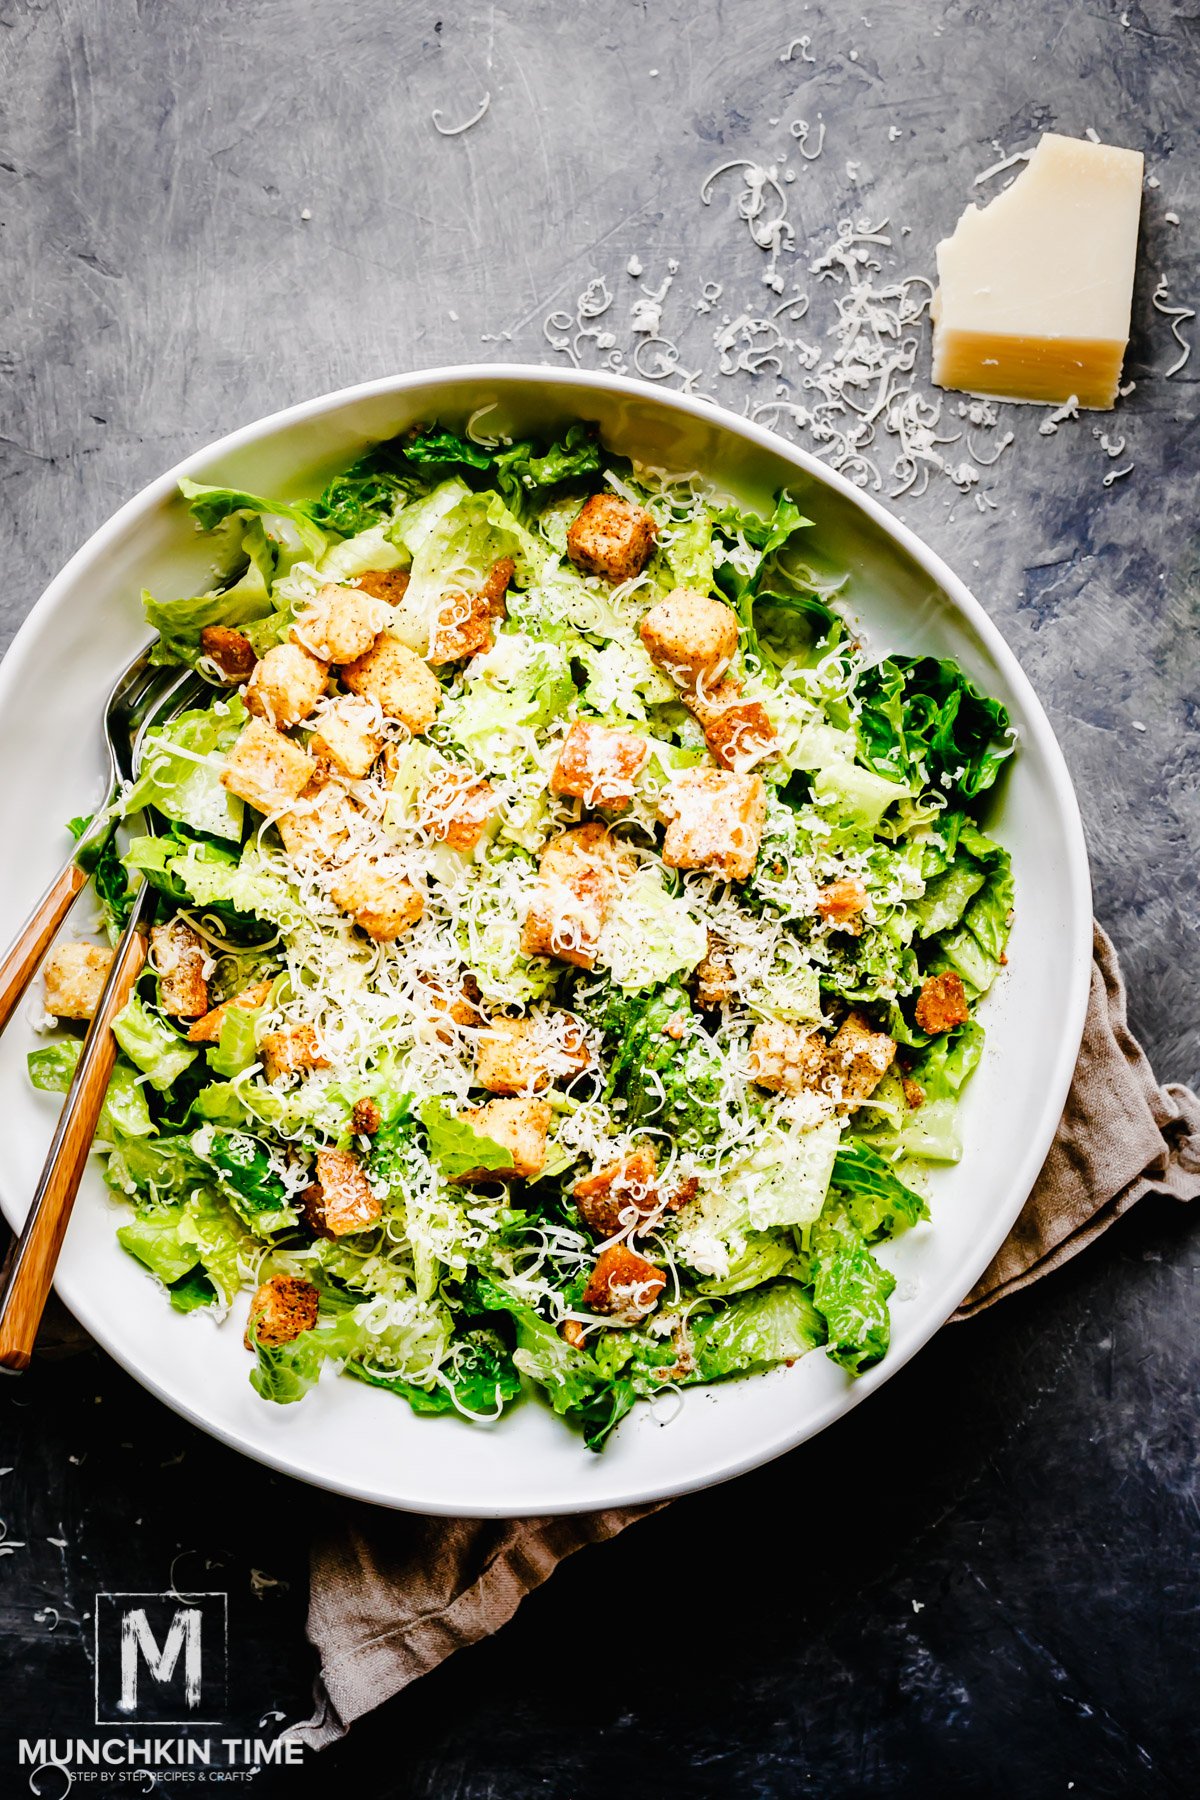 Best Caesar Salad Recipe With Salad Dressing From Scratch